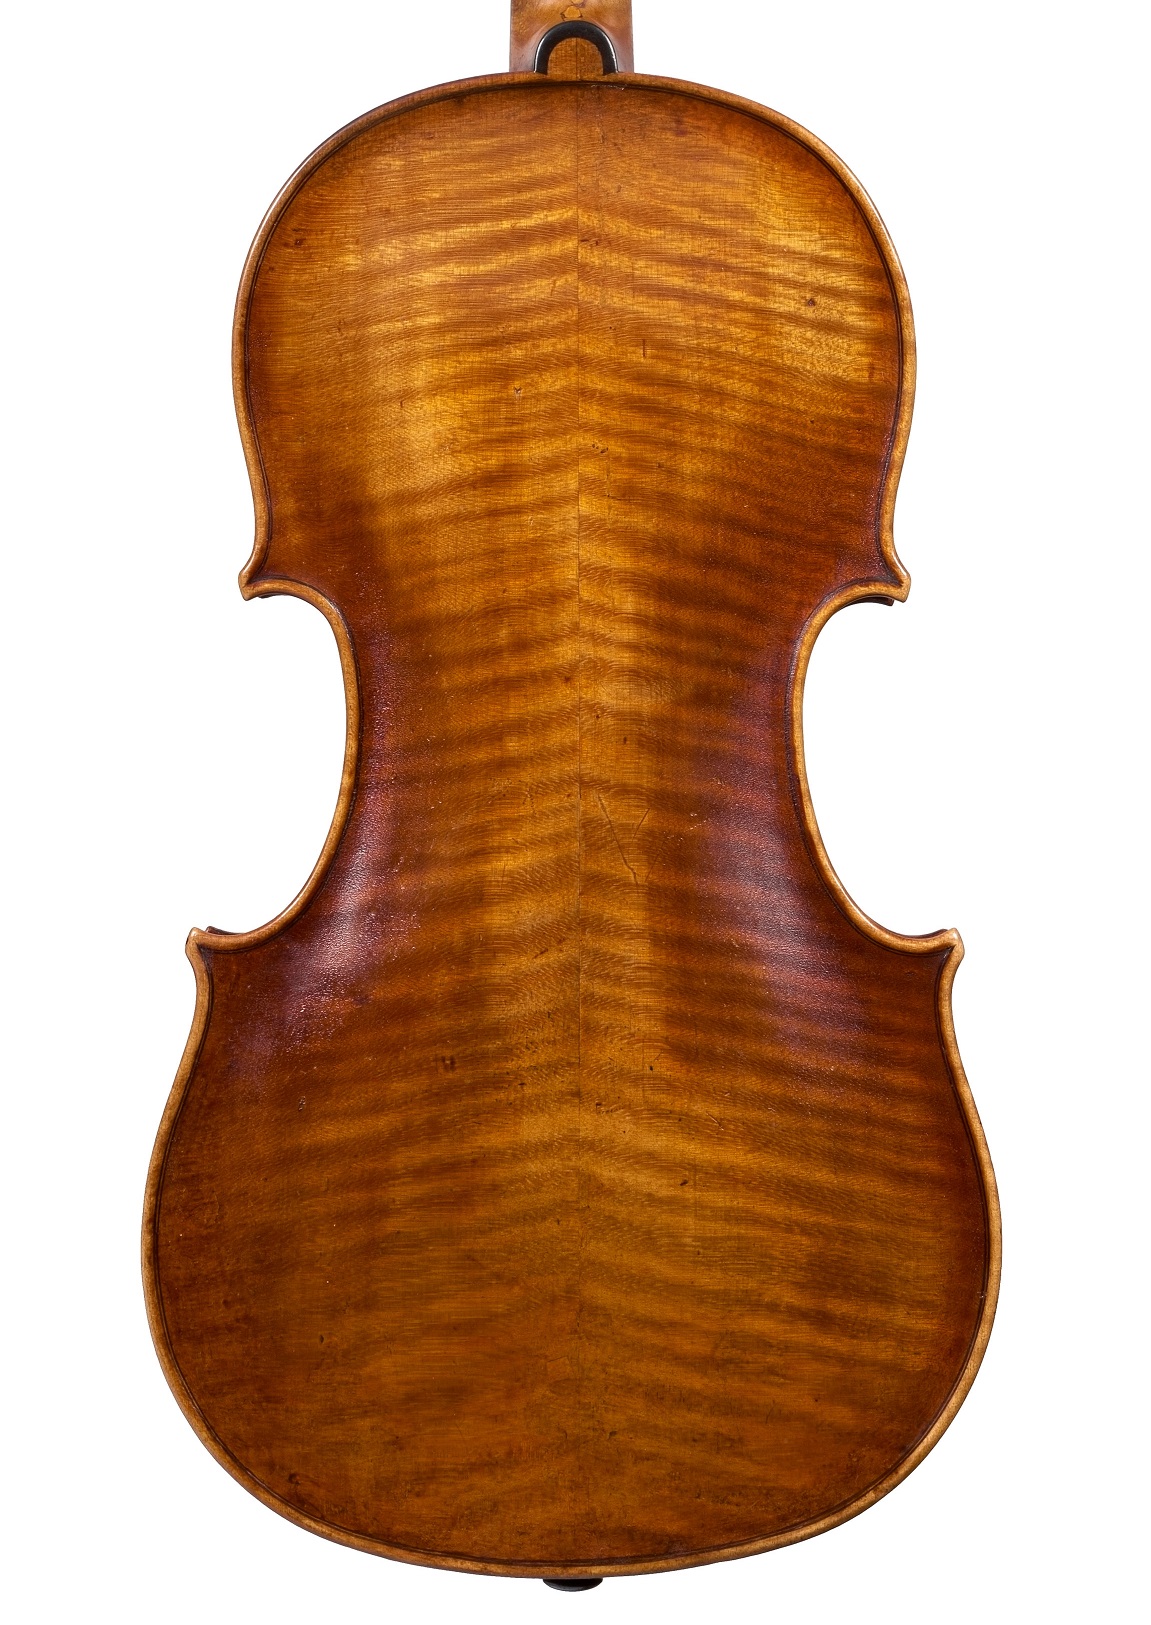 Back of the Domenico Montagnana violin in the Rosenberg collection at Ingles & Hayday